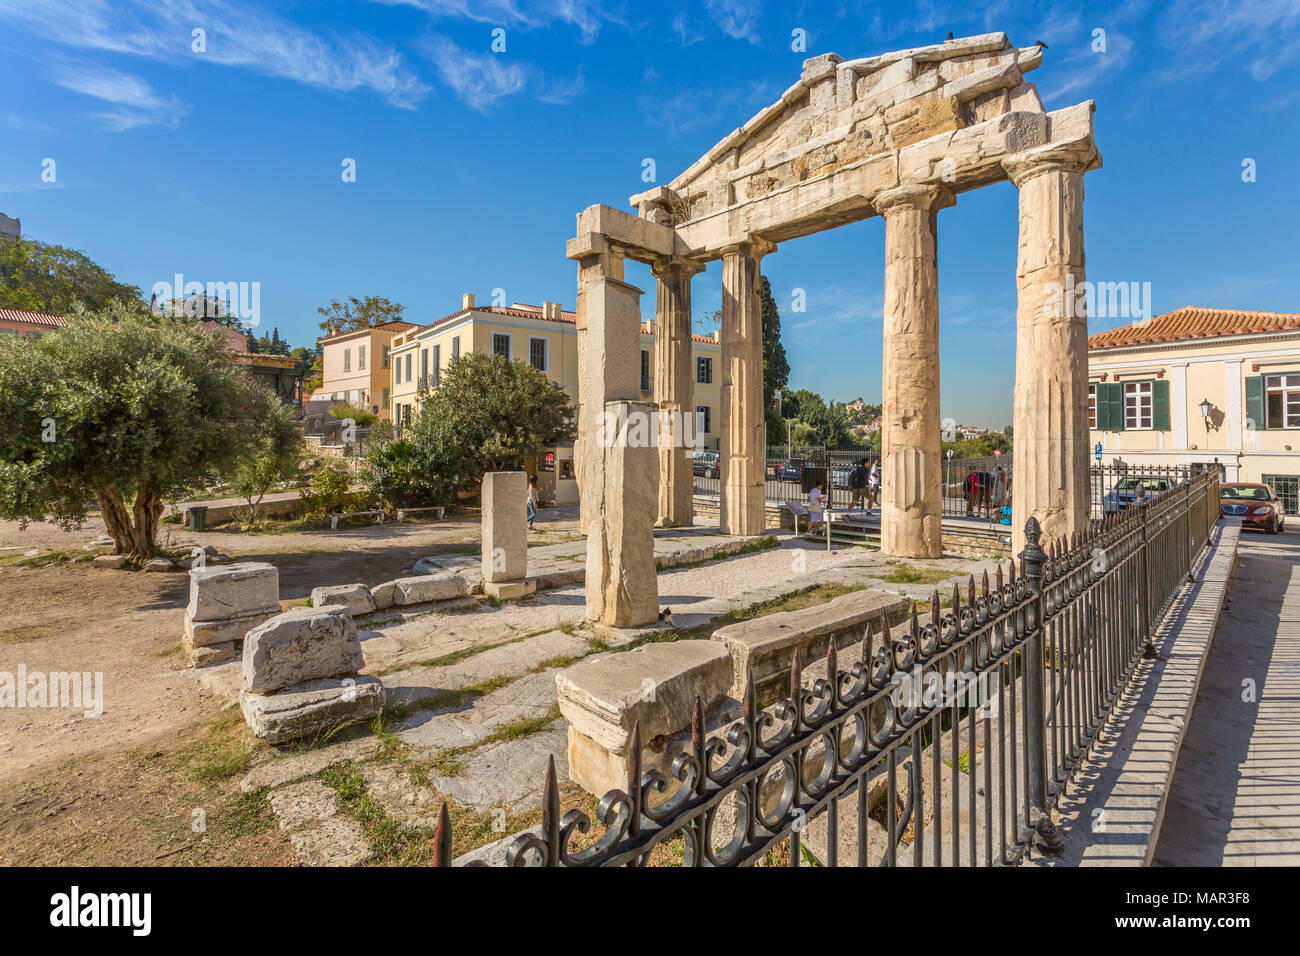 View of the Gate of Athena Archegetis, historical landmark at the foot of the Acropolis, Athens, Greece, Europe Stock Photo